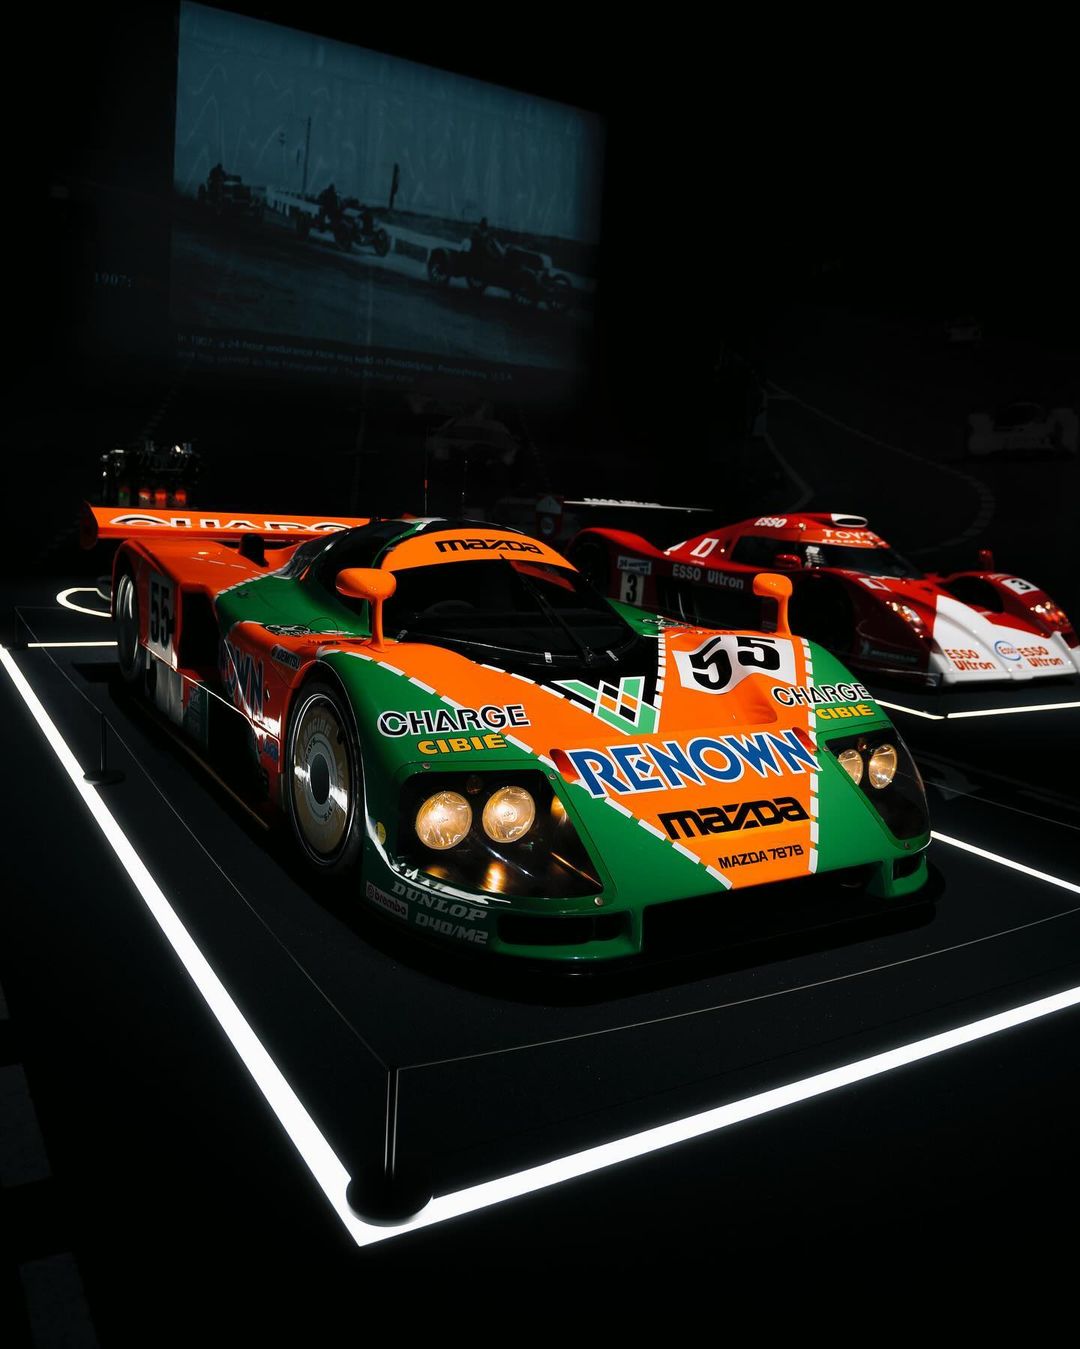 Le Mans Racing Stripes Le Mans Prototype Mazda Mazda 787B Japanese Cars Race Cars Livery 1080x1349